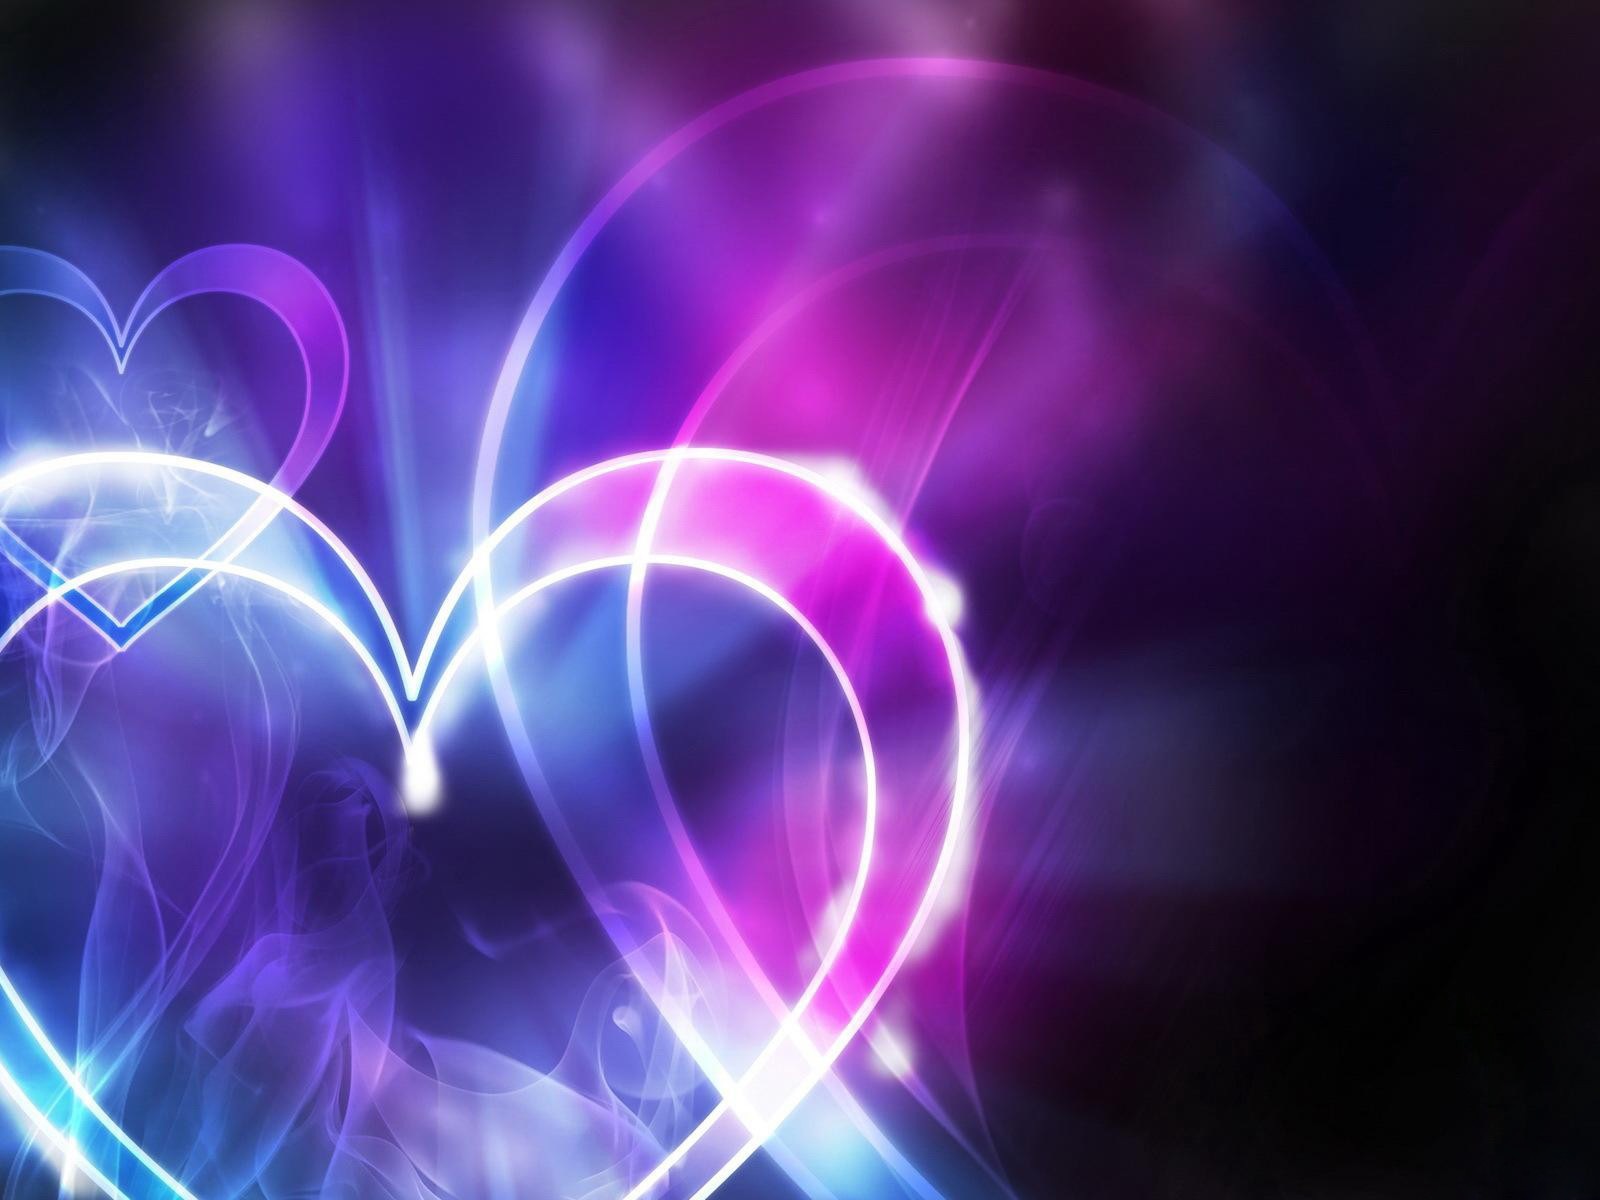 The theme of love, creative heart-shaped HD wallpapers #8 - 1600x1200